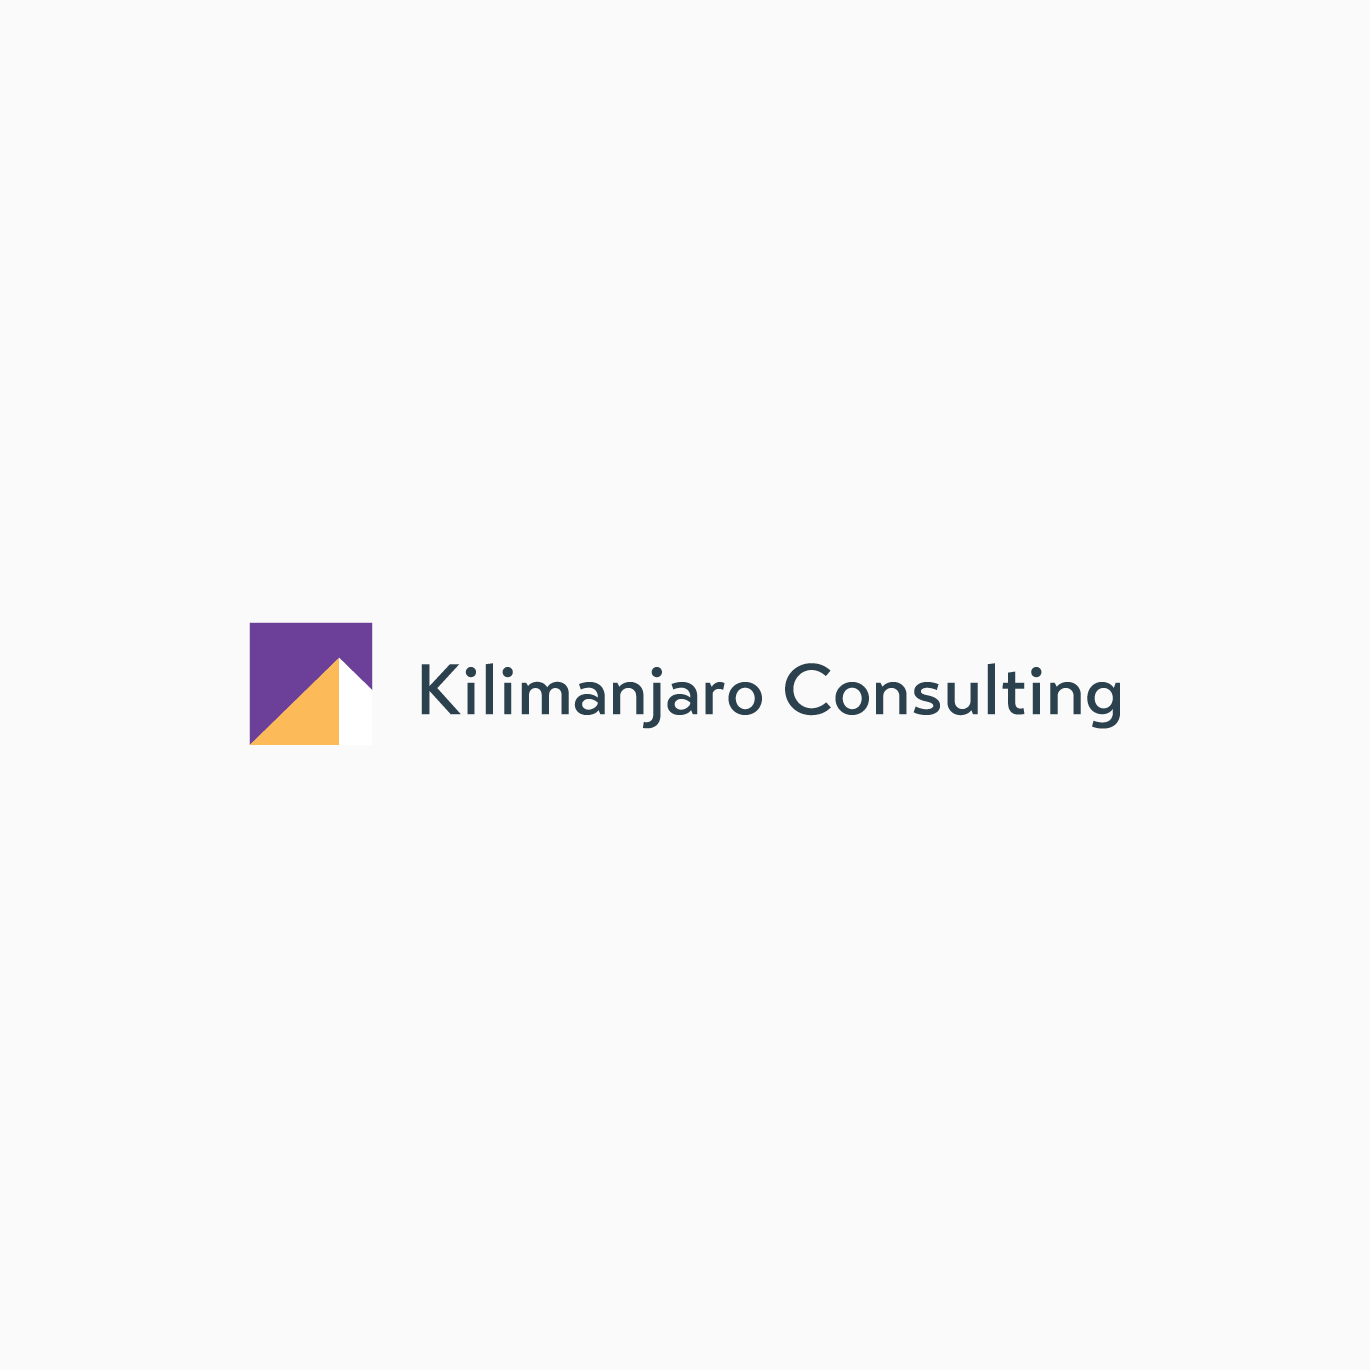 Kilimanjaro Consulting logo by Squeeze Creative